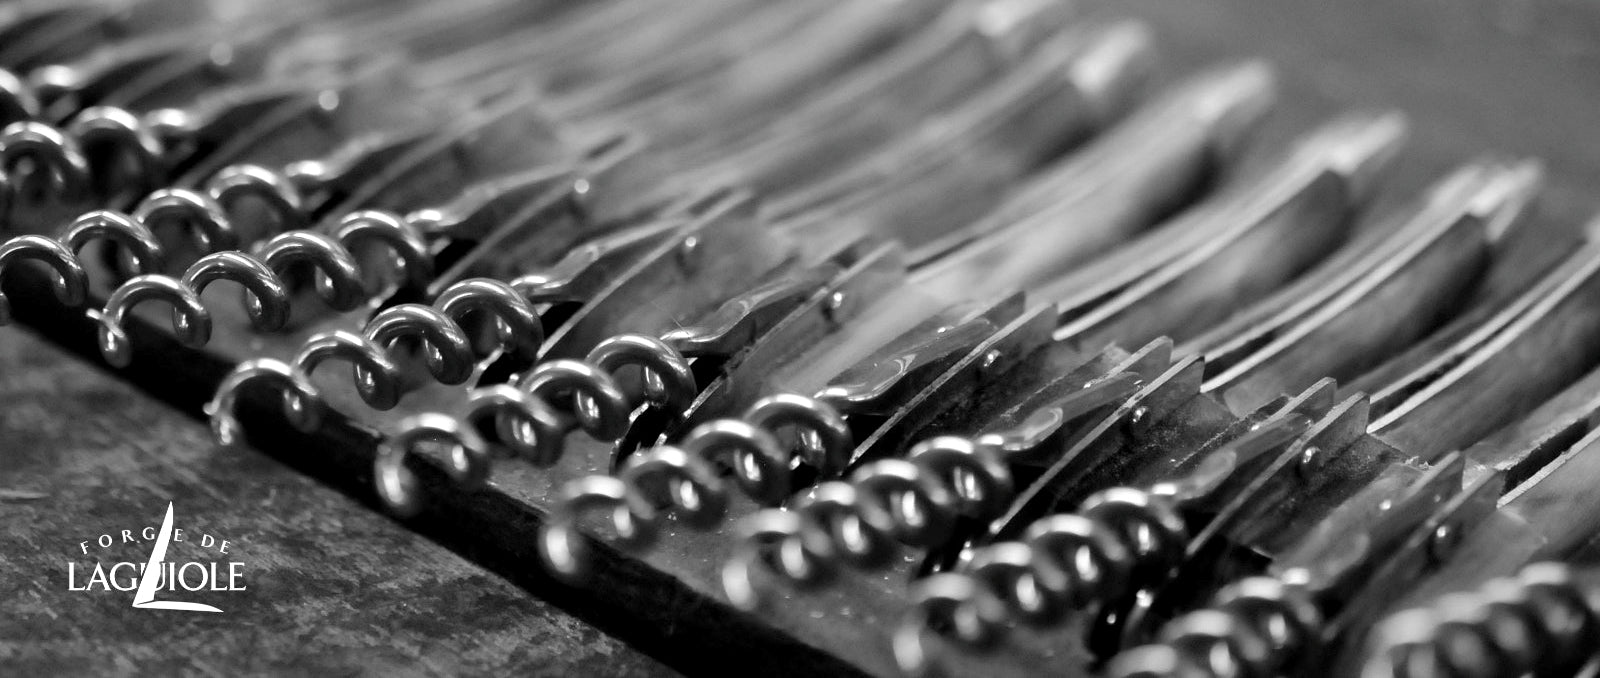 Embracing Tradition: The Art of Using Handmade Laguiole Corkscrews